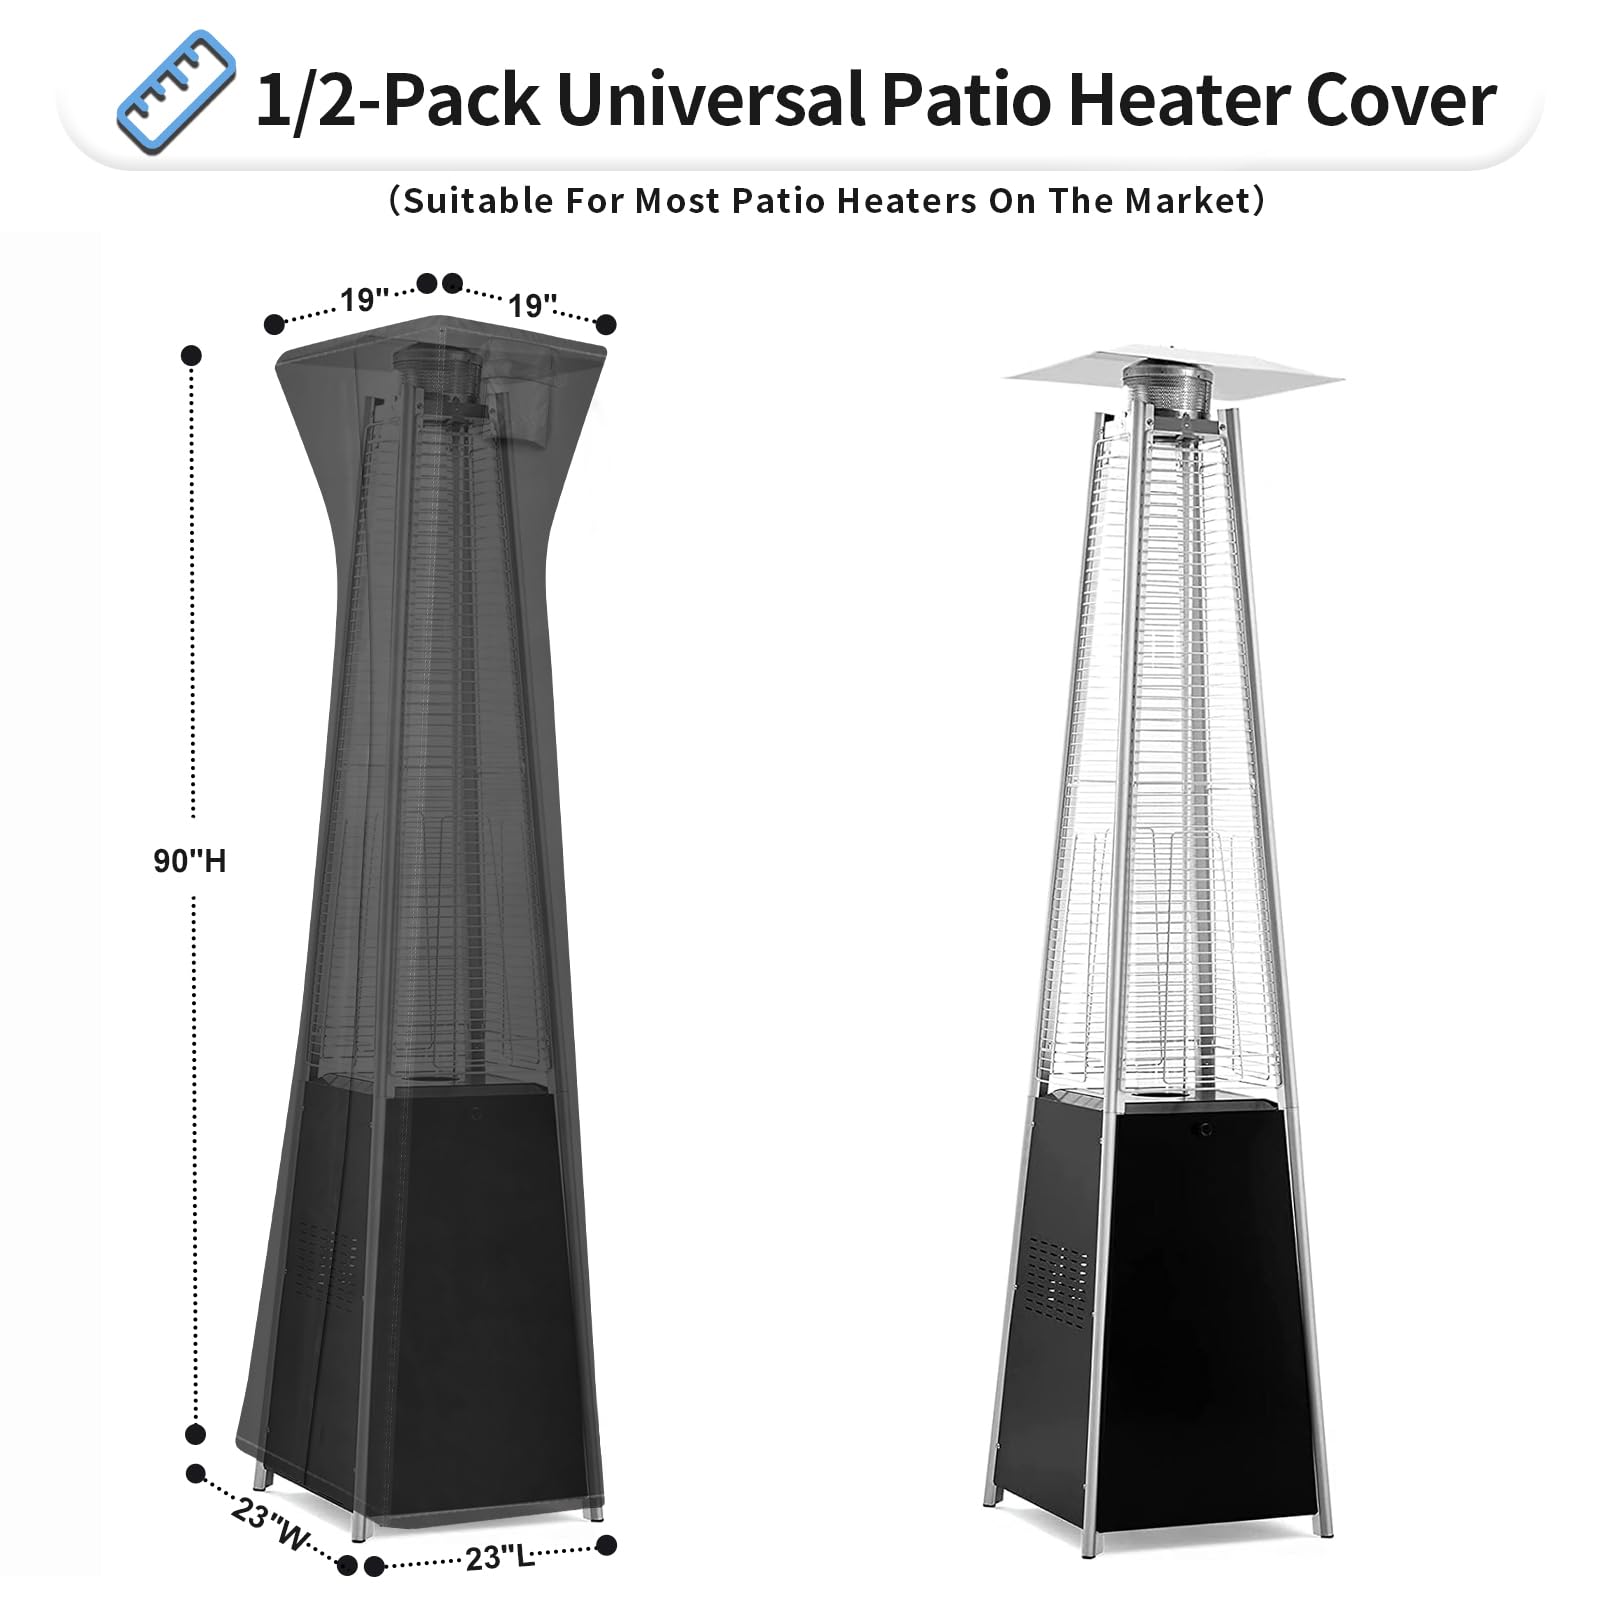 OutdoorLines Waterproof Outdoor Patio Heater Covers with Zipper and Storage Bag, Dust-proof UV-Resistant Windproof Propane Heavy Duty Heater Cover for Standing Heater, 2 Packs-90Hx23Lx23W inch Black